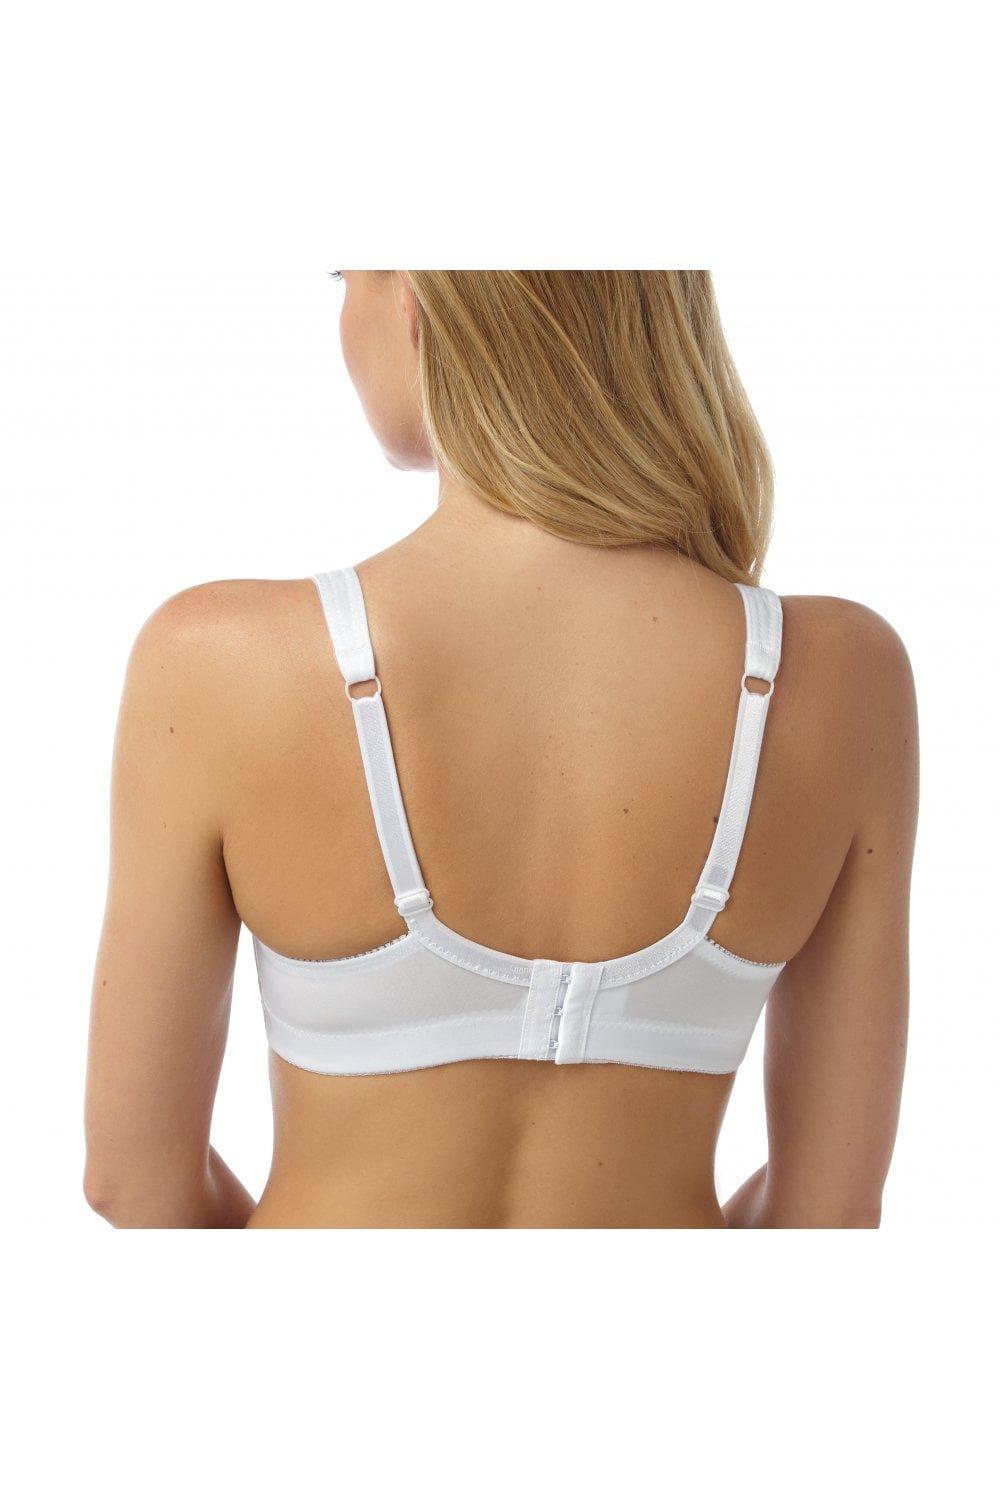 Camille Womens Non Wired Full Cup Soft Lace Bra White 40DD White : Camille:  : Fashion